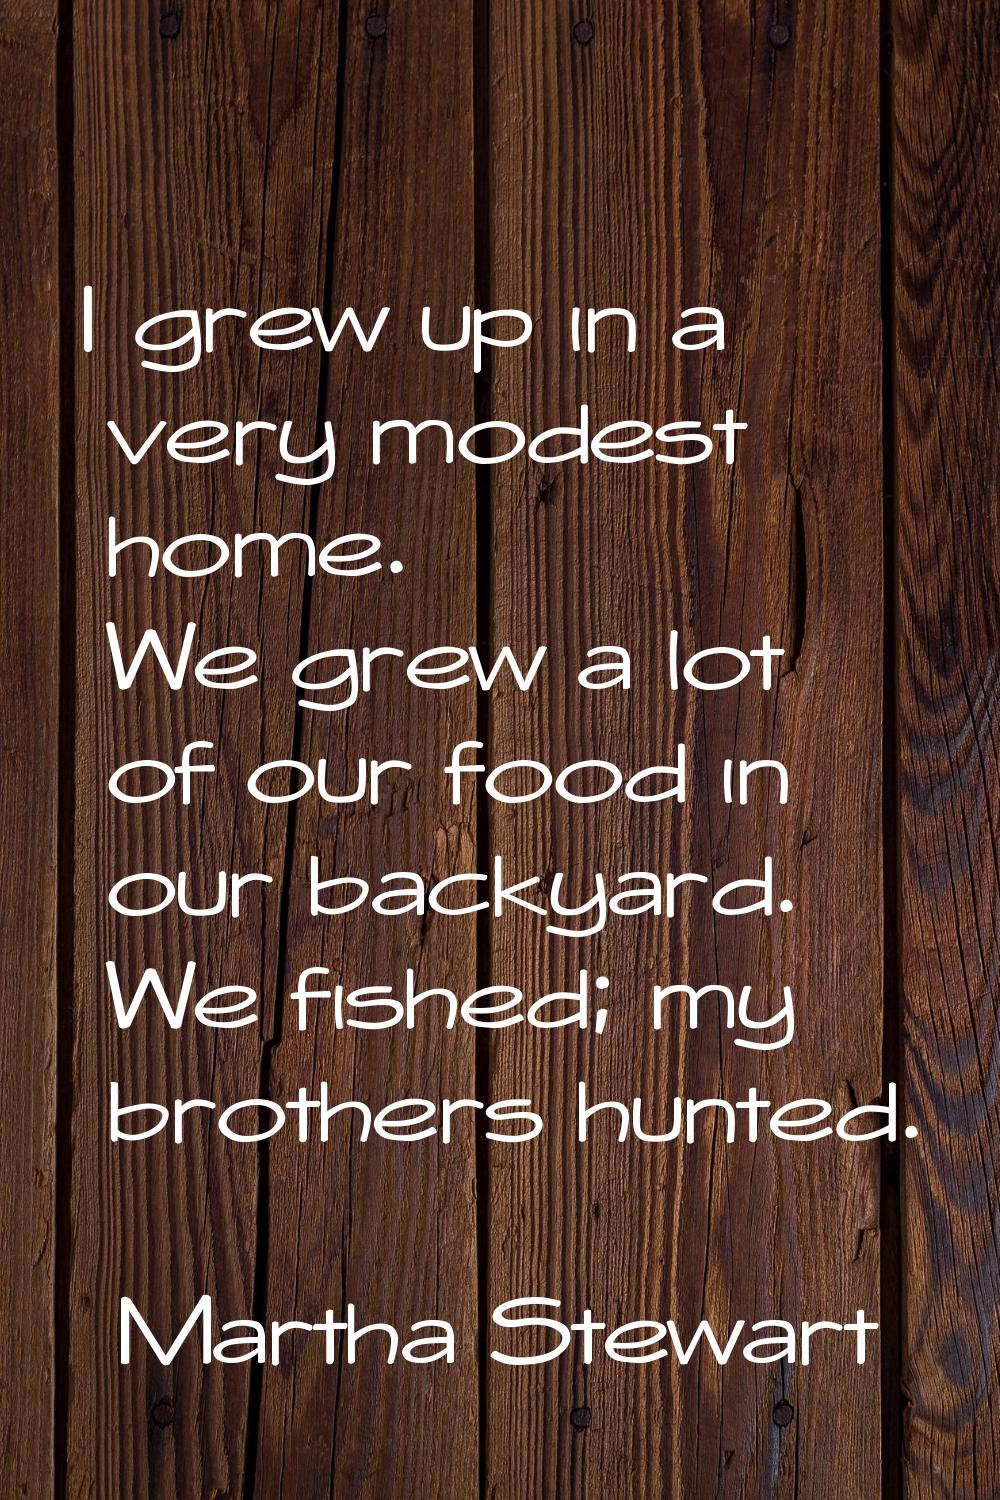 I grew up in a very modest home. We grew a lot of our food in our backyard. We fished; my brothers 